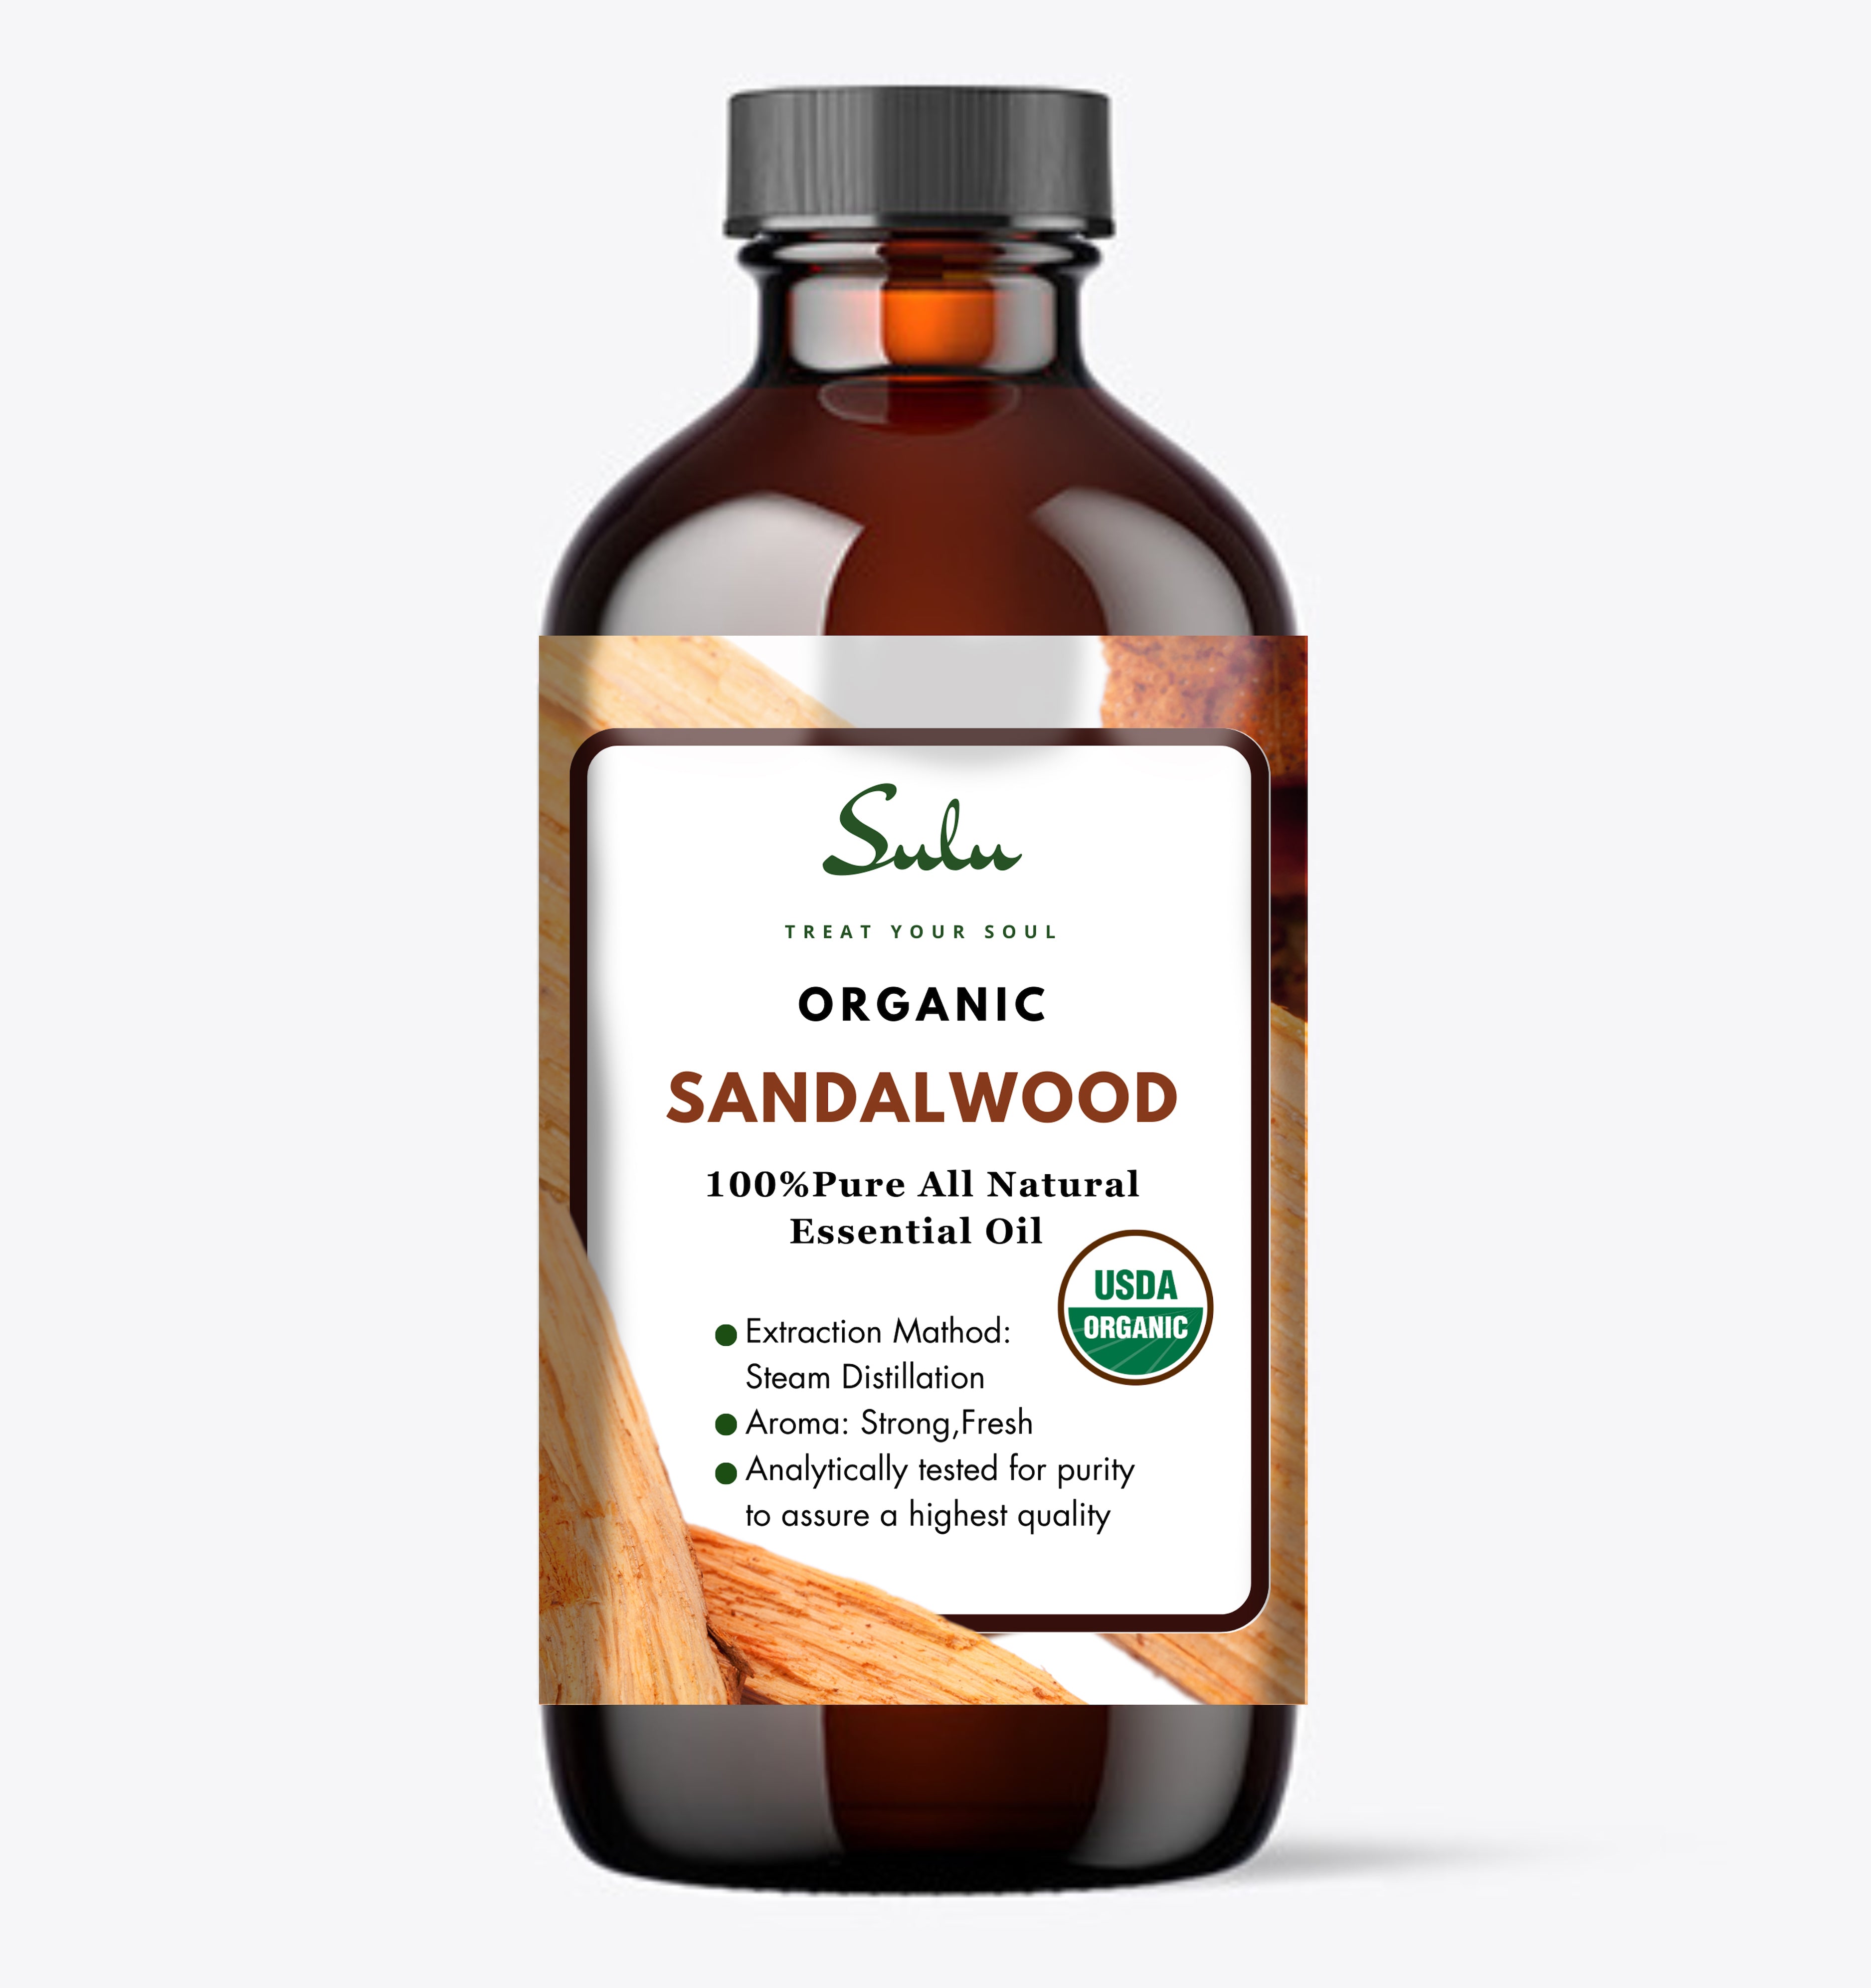 Sandalwood Essential Oil - 100% Pure Aromatherapy Grade Essential Oil by Nature's Note Organics 8 oz.